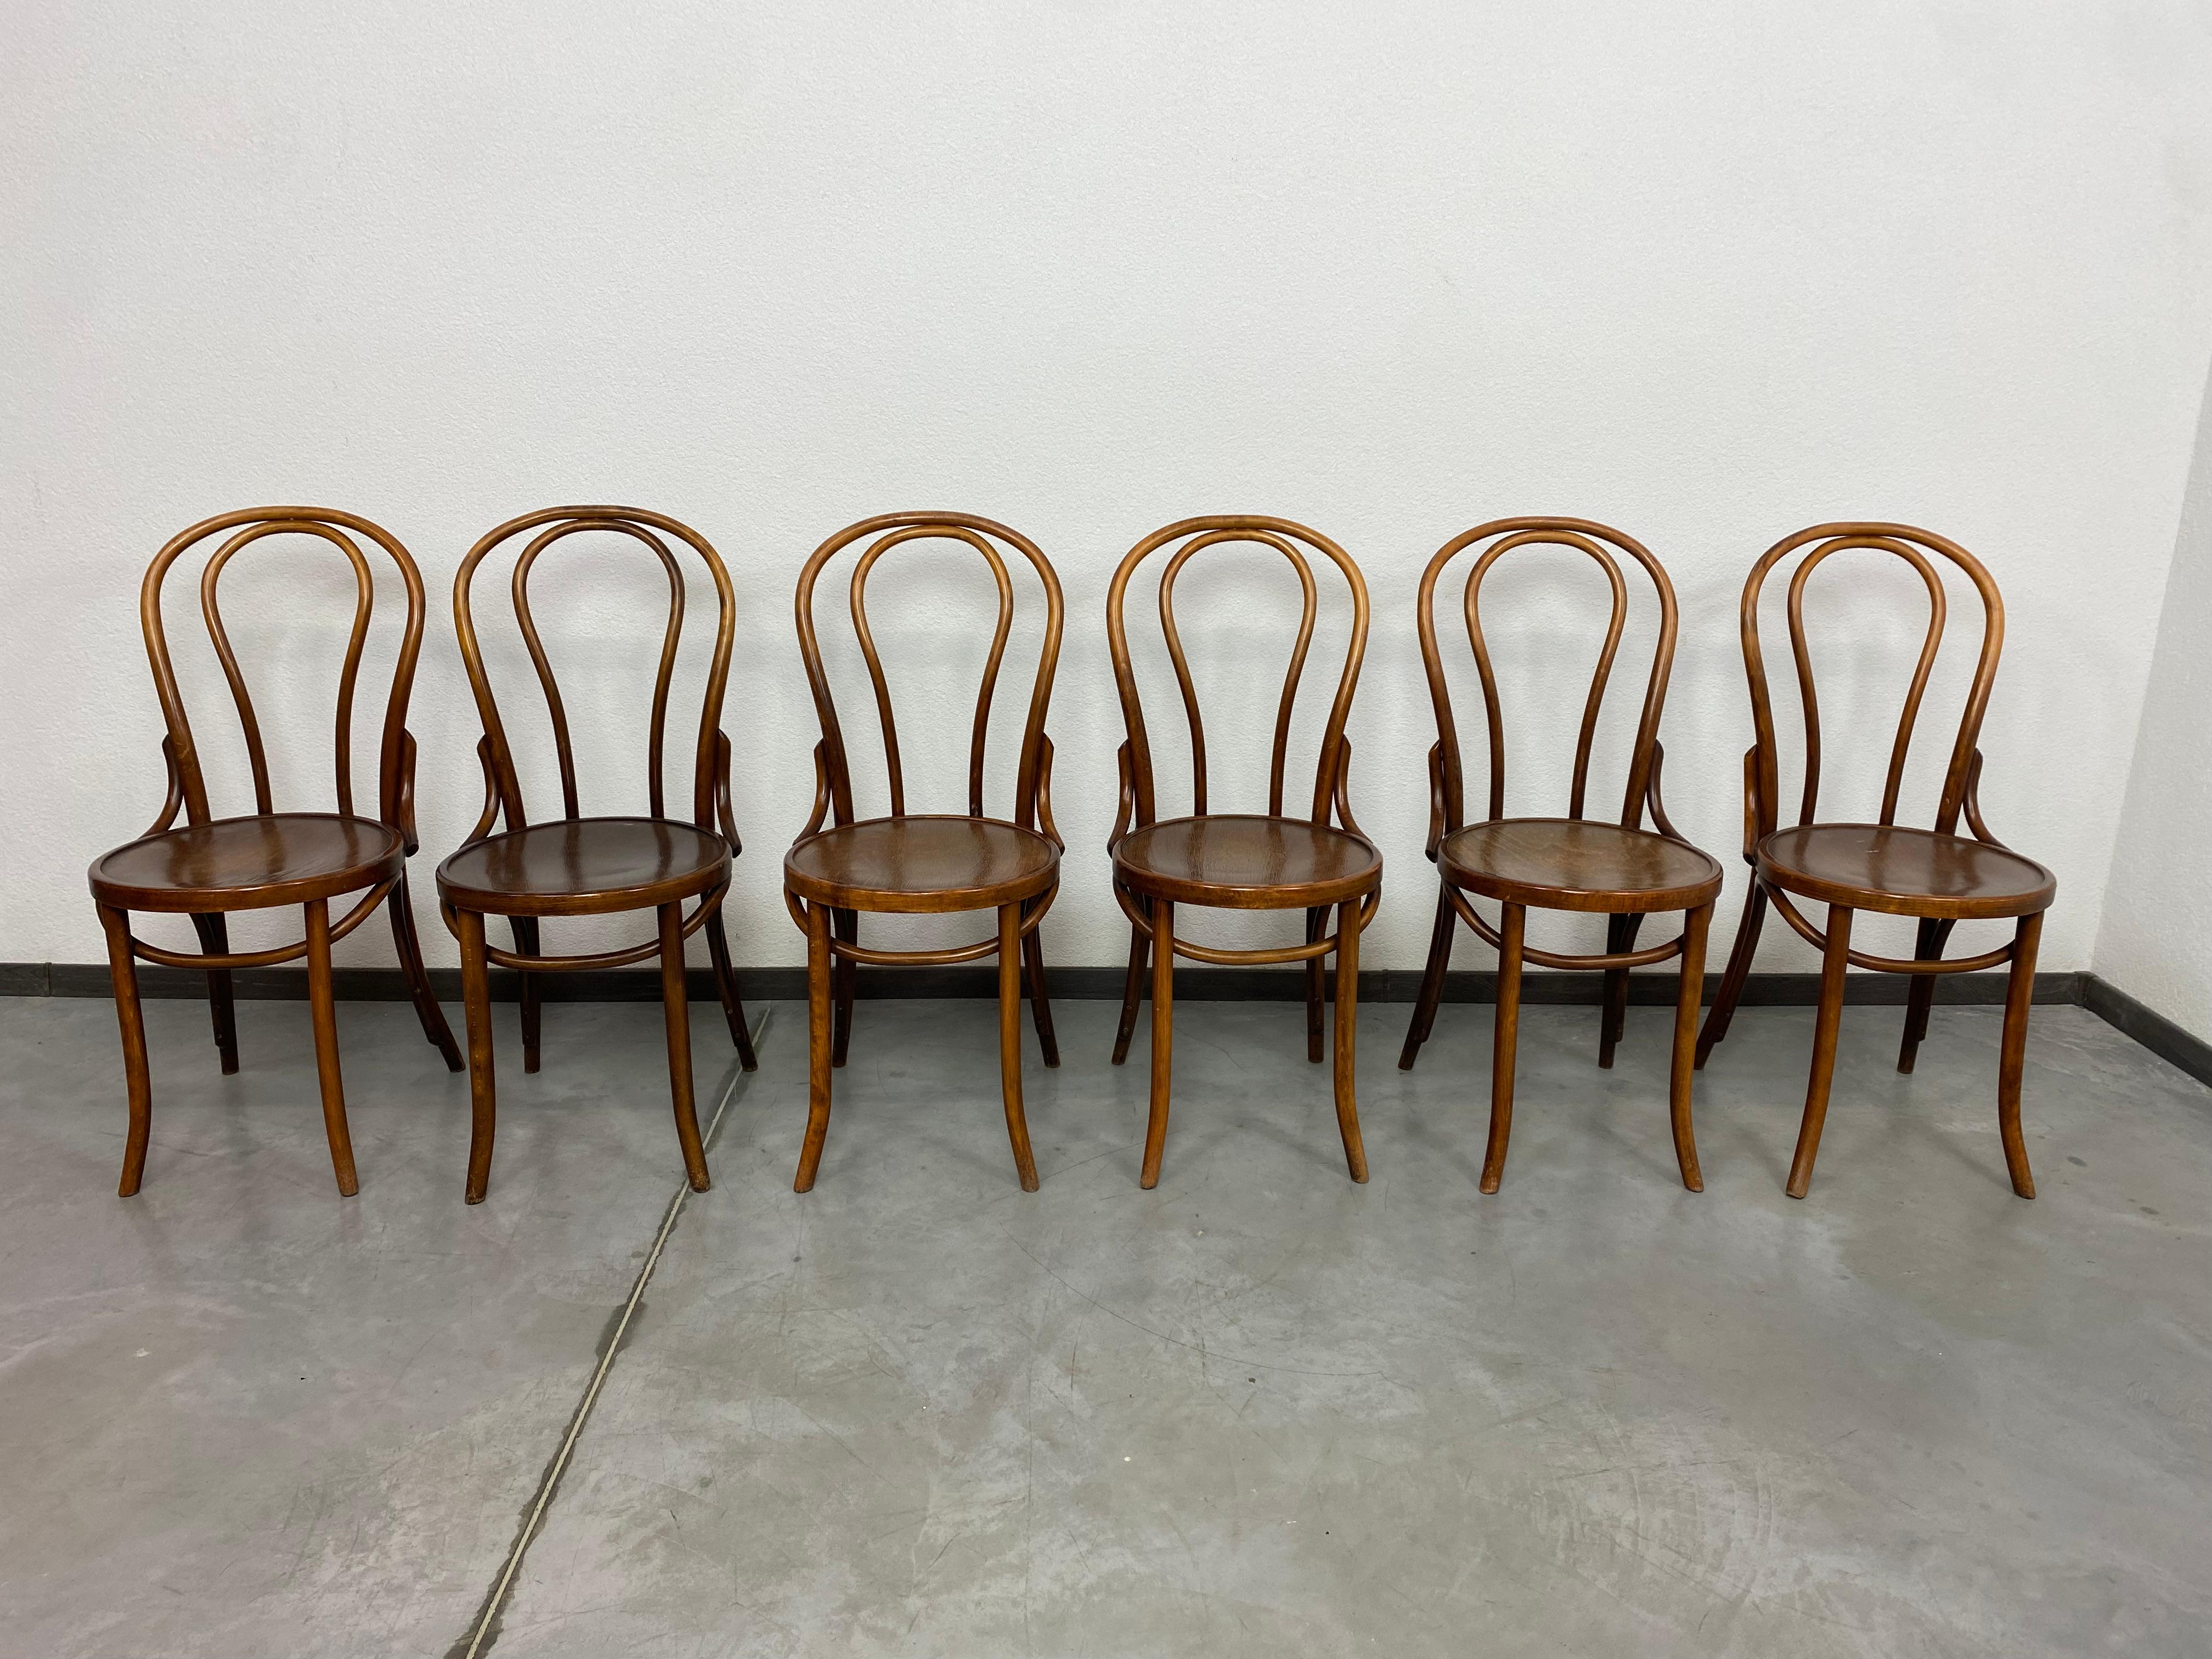 Set of 6 Thonet dining chairs no.16 in original vintage condition with signs of use.